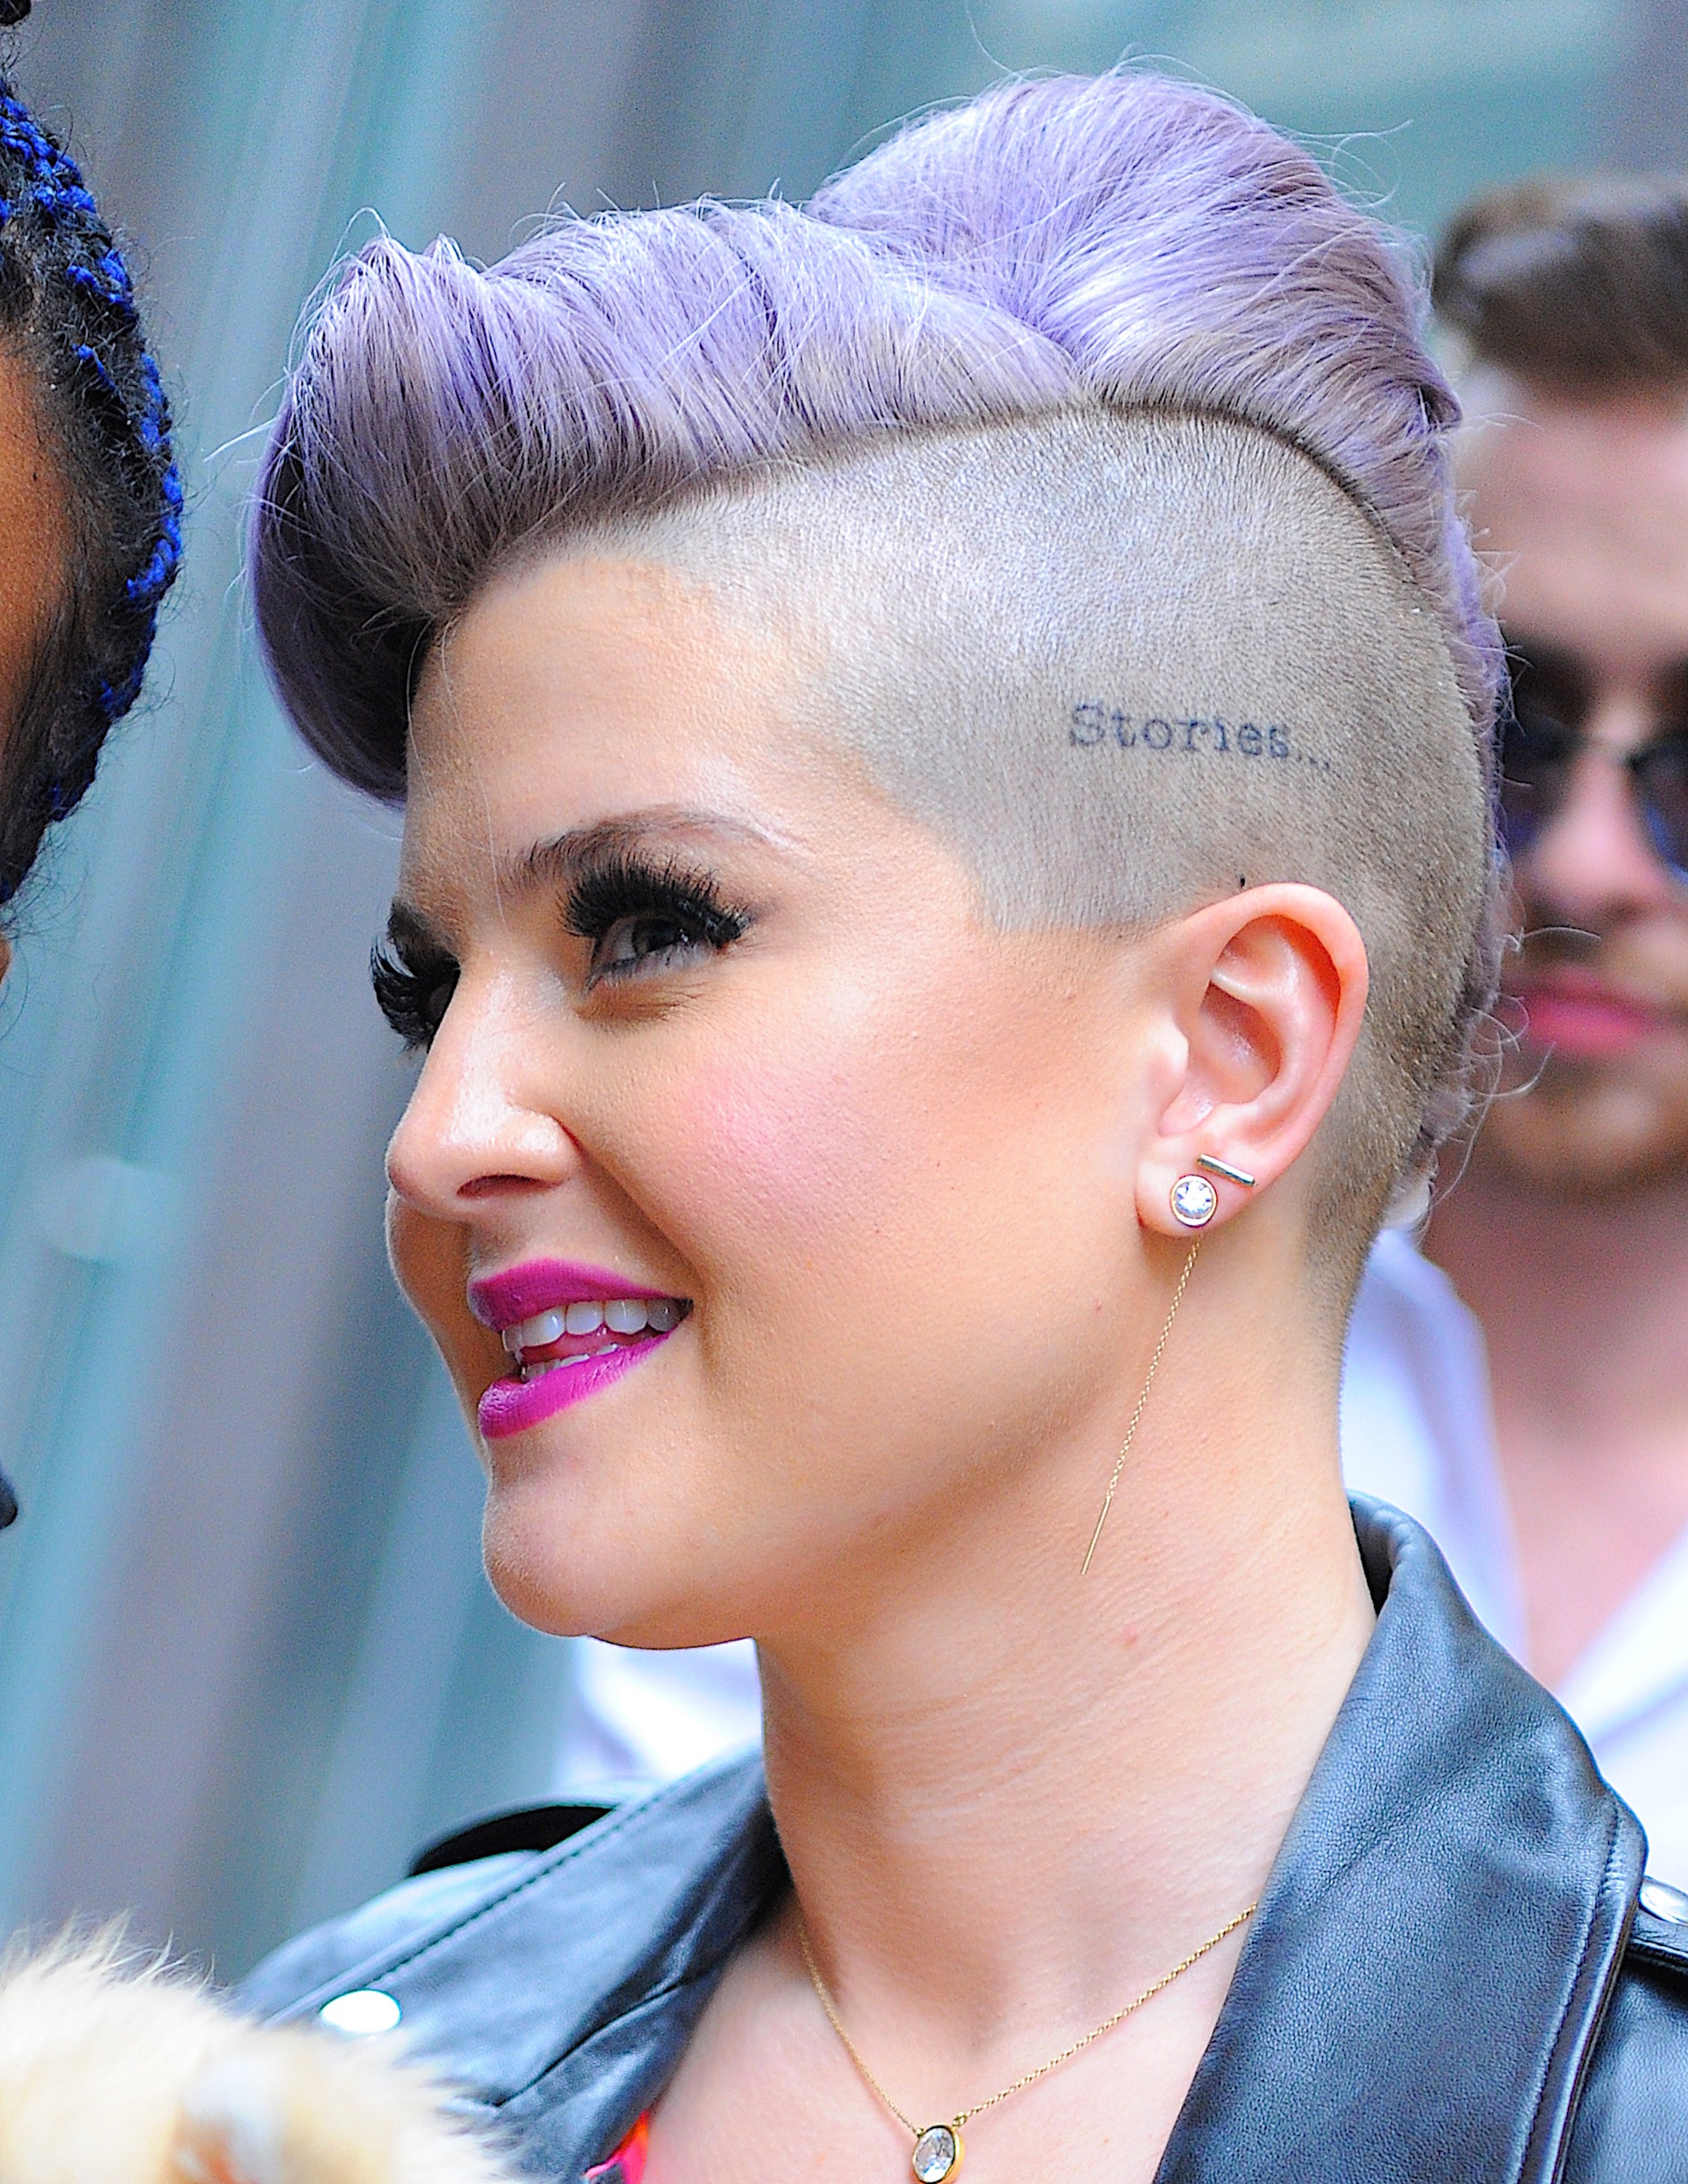 Kelly Osbourne visits the SiriusXM Studios in New York City on November 12, 2015. | Source: Getty Images